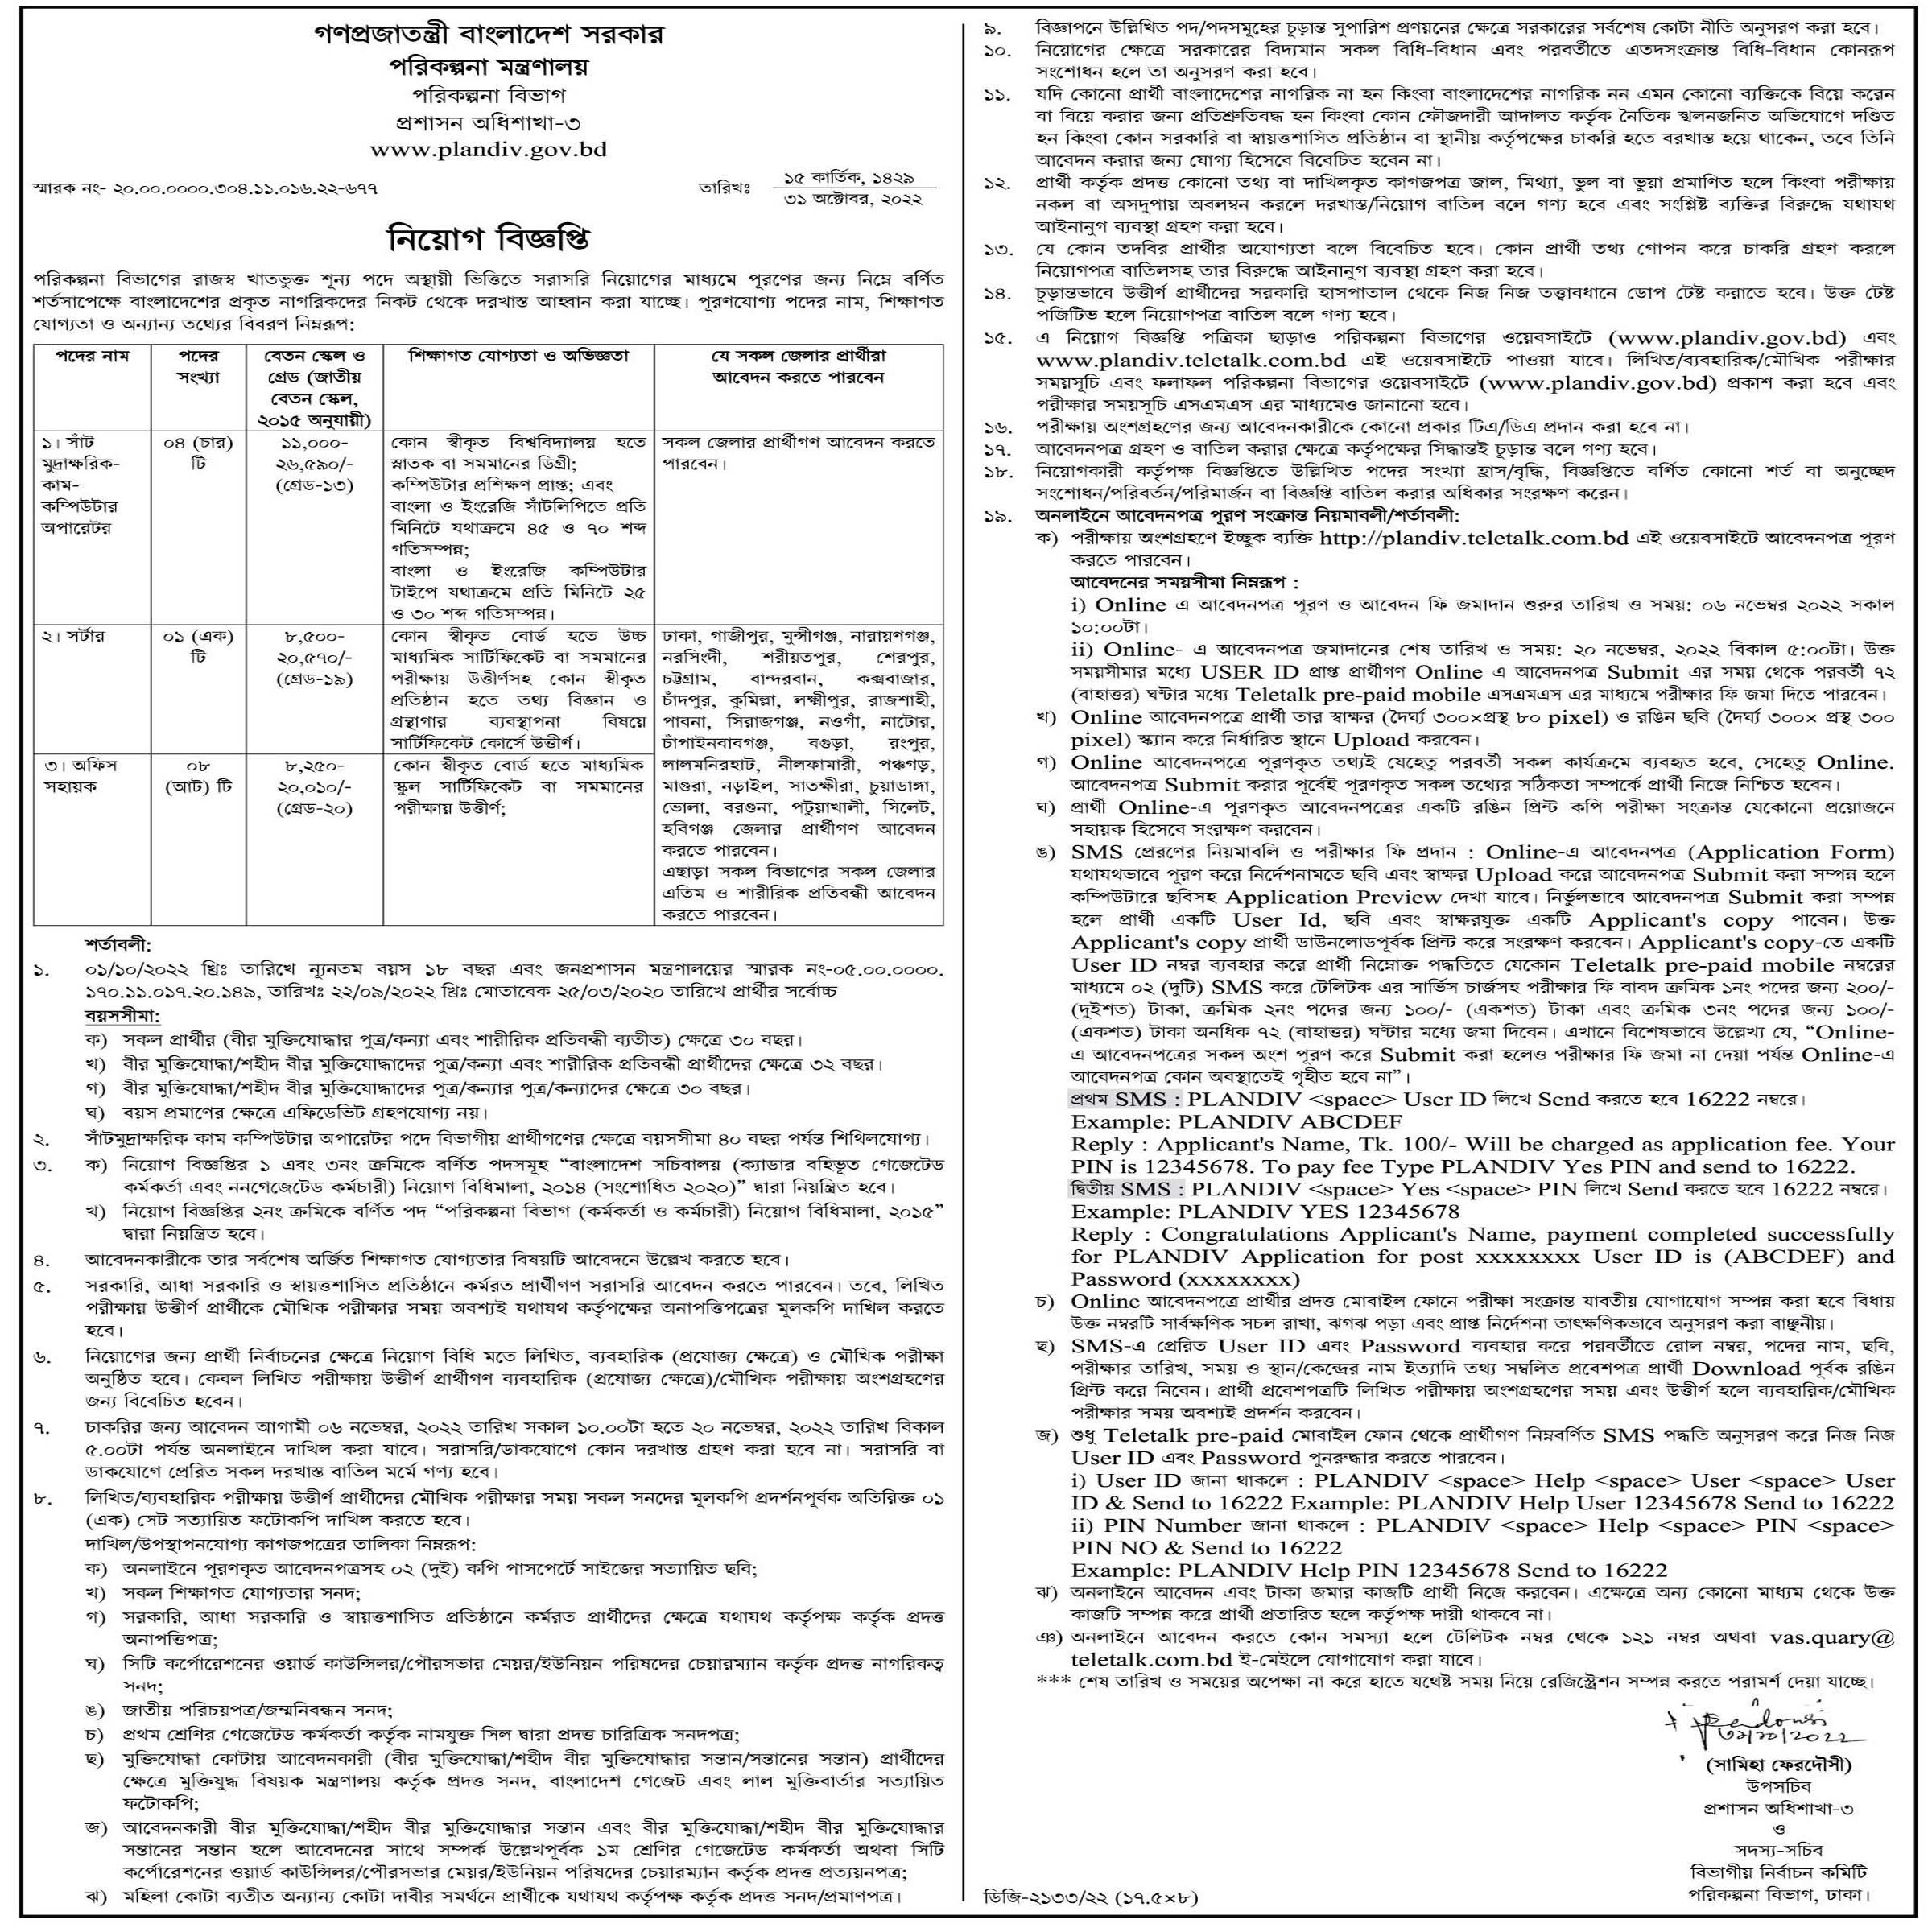 Ministry of Planning Recruitment Circular